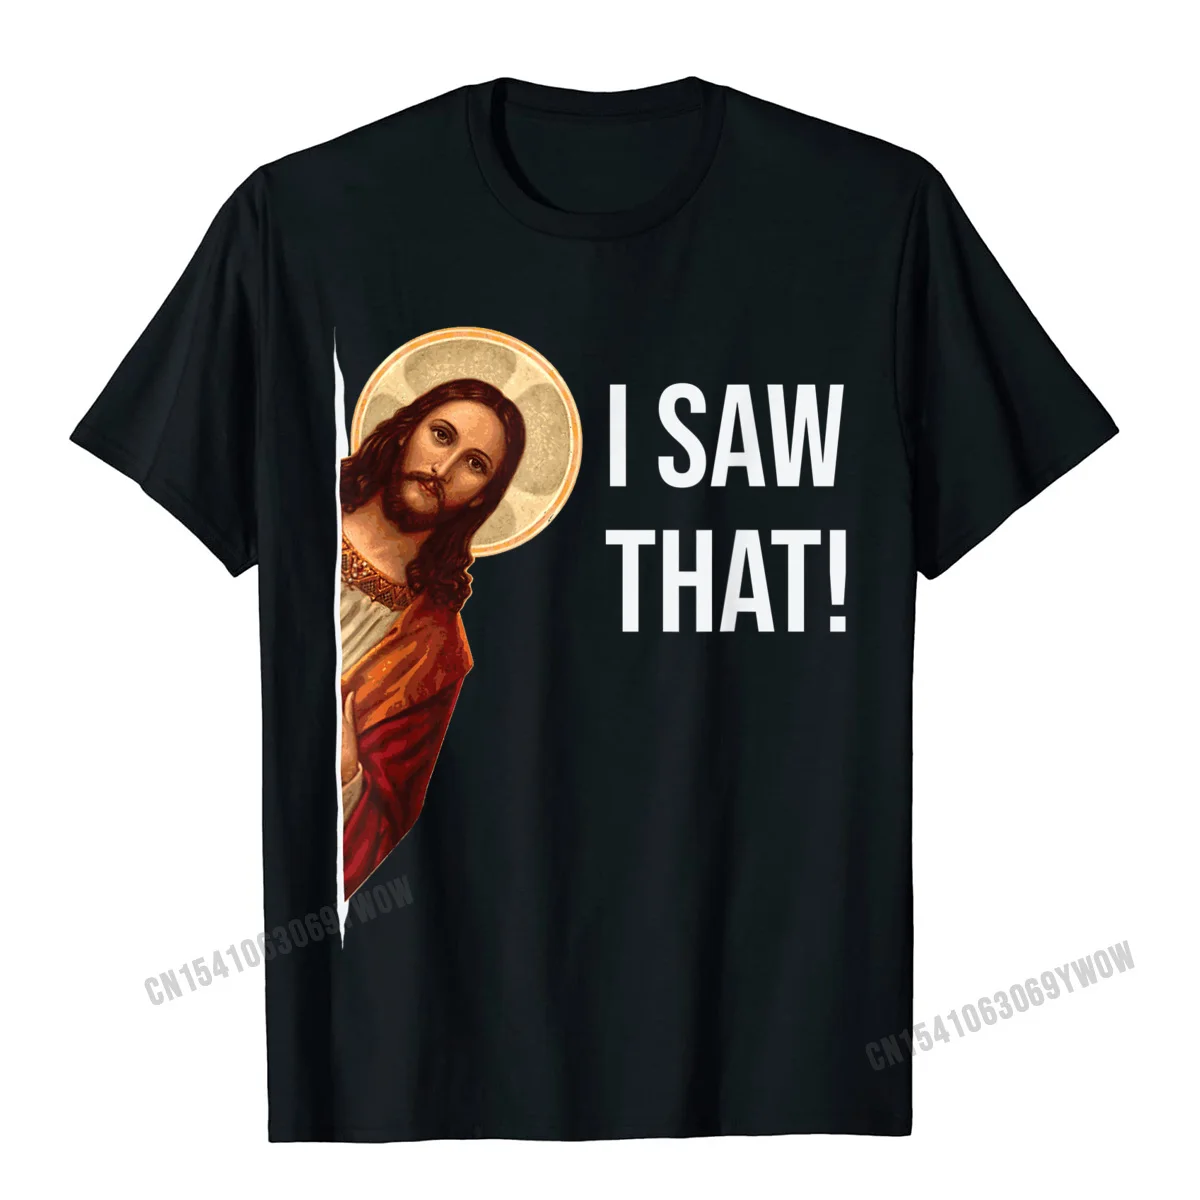 

Funny Quote Jesus Meme I Saw That Christian T-Shirt Camisas Men Top T-Shirts Fashionable Design Cotton Men's Tops Tees Cosie